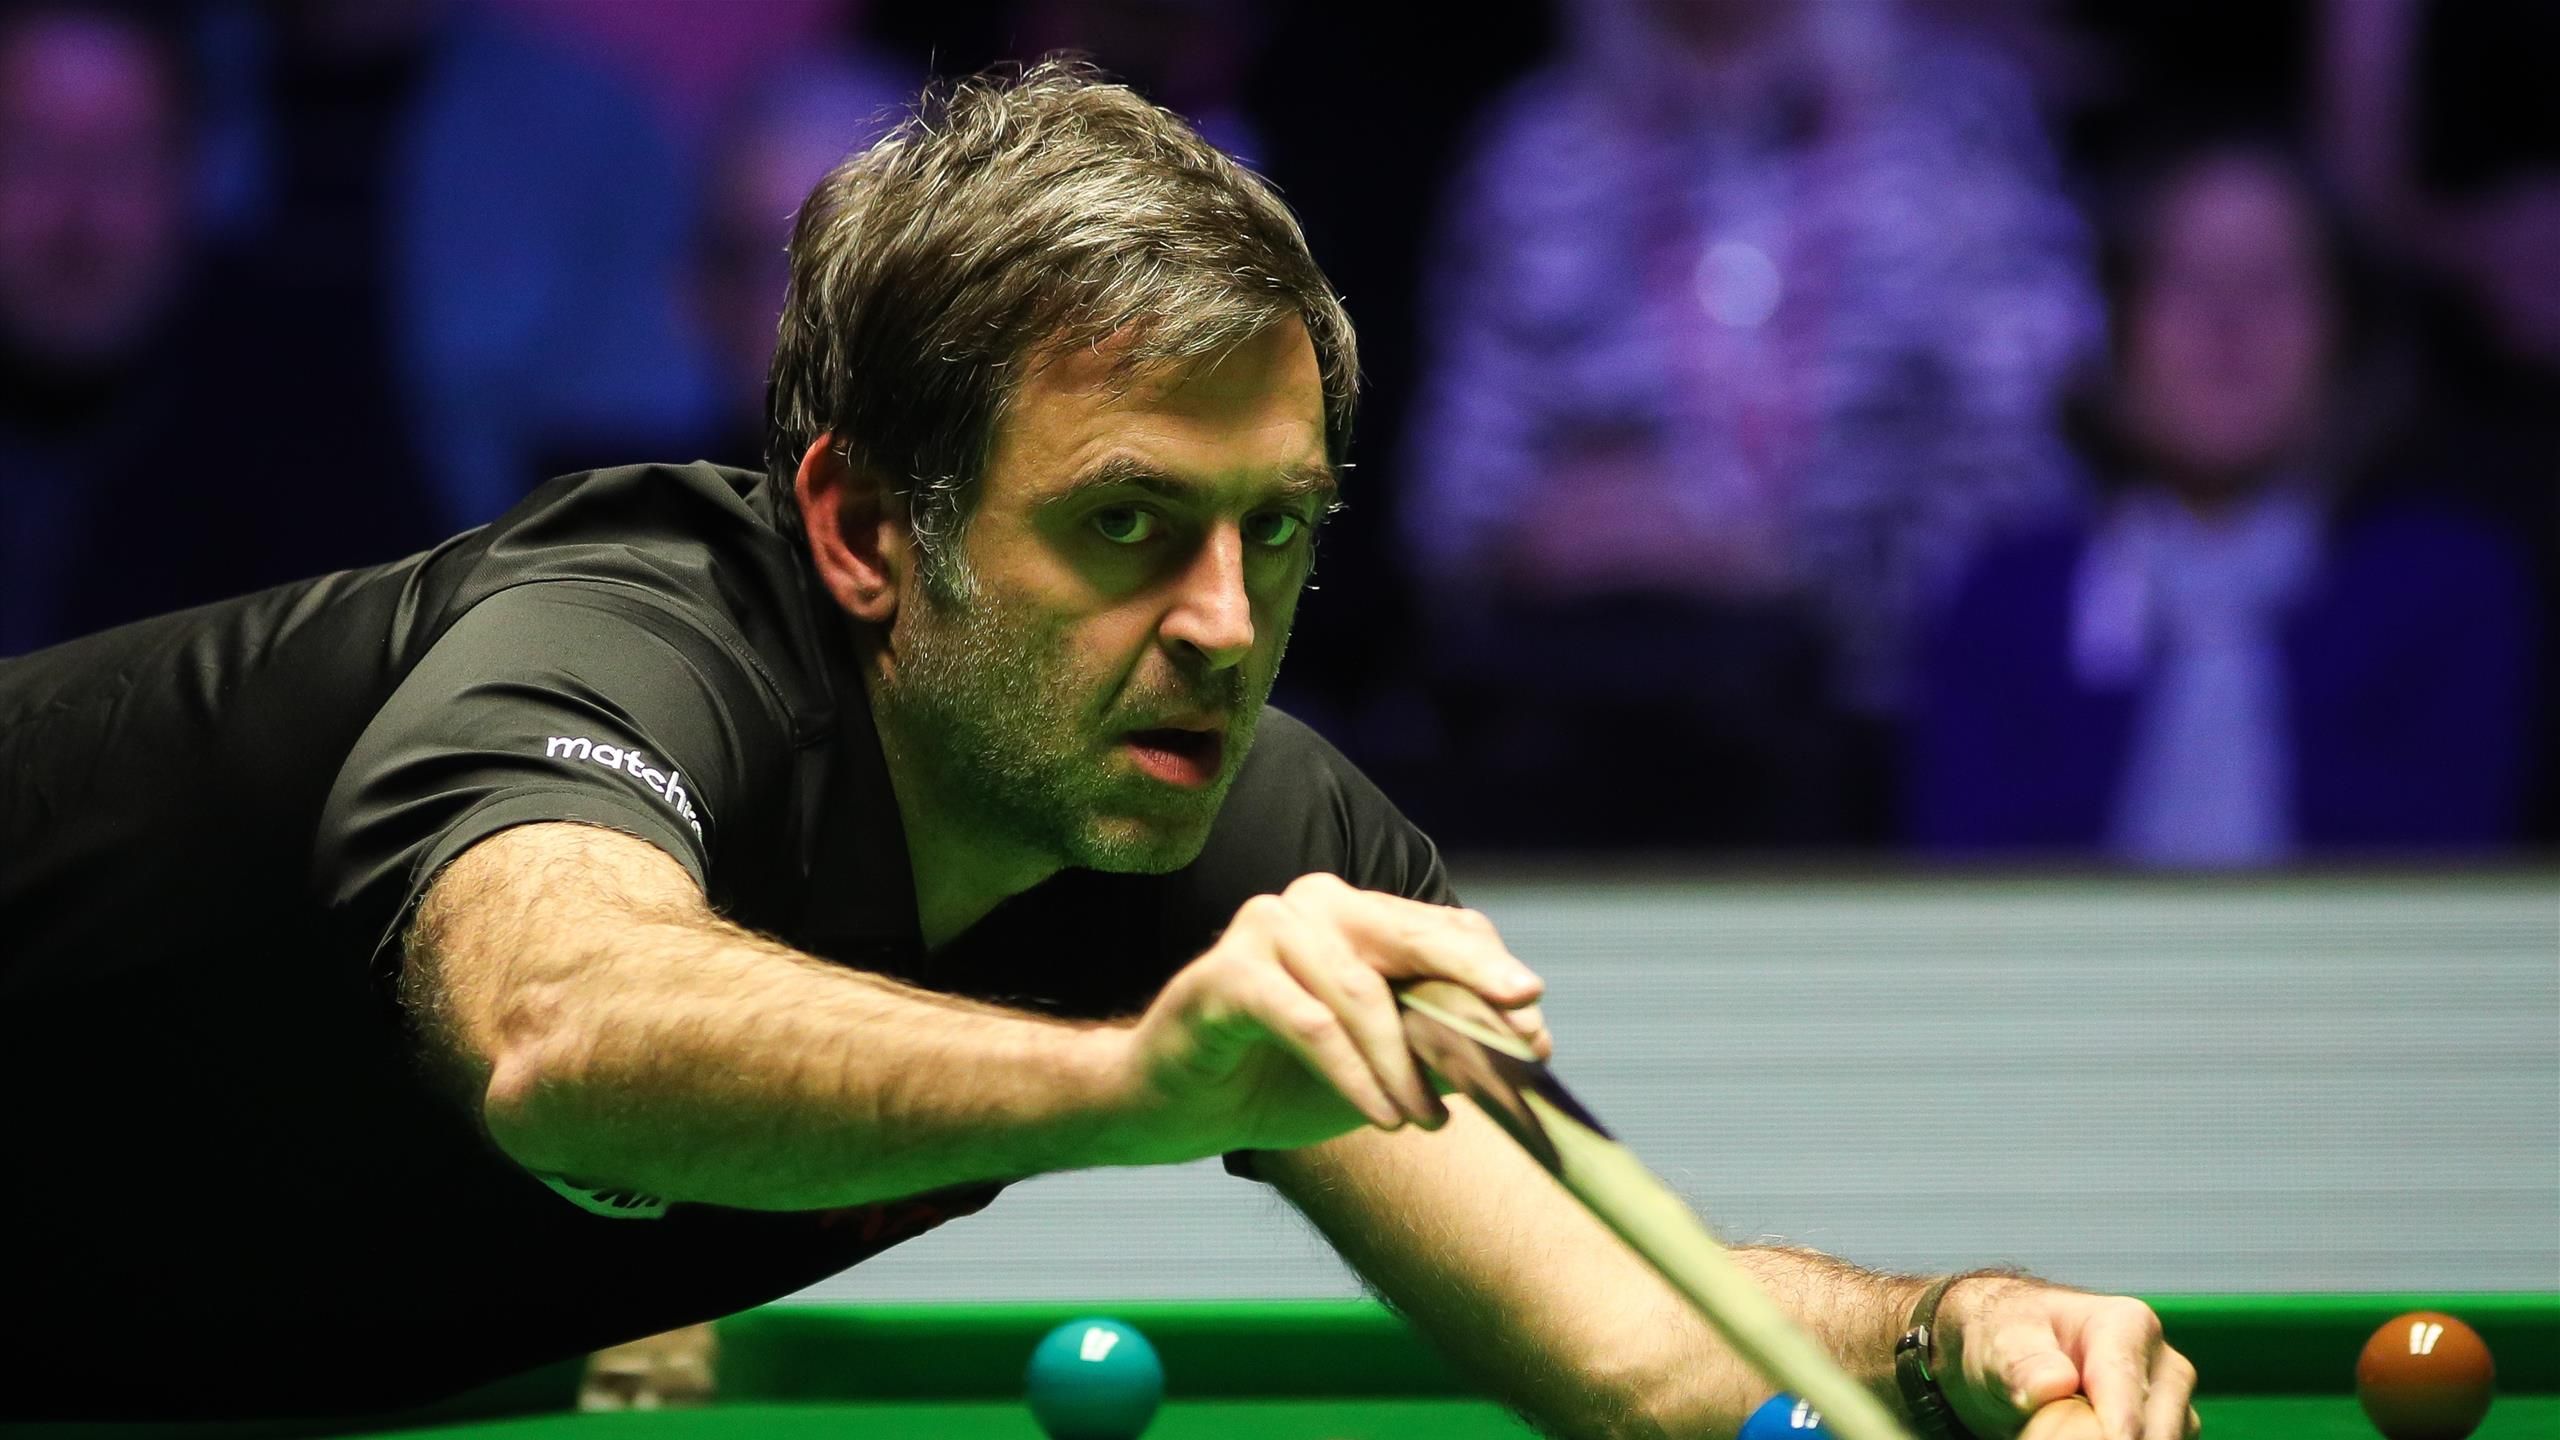 Ronnie OSullivan clinches Champion of Champions 2022 title in style after Judd Trump 147 in classic final